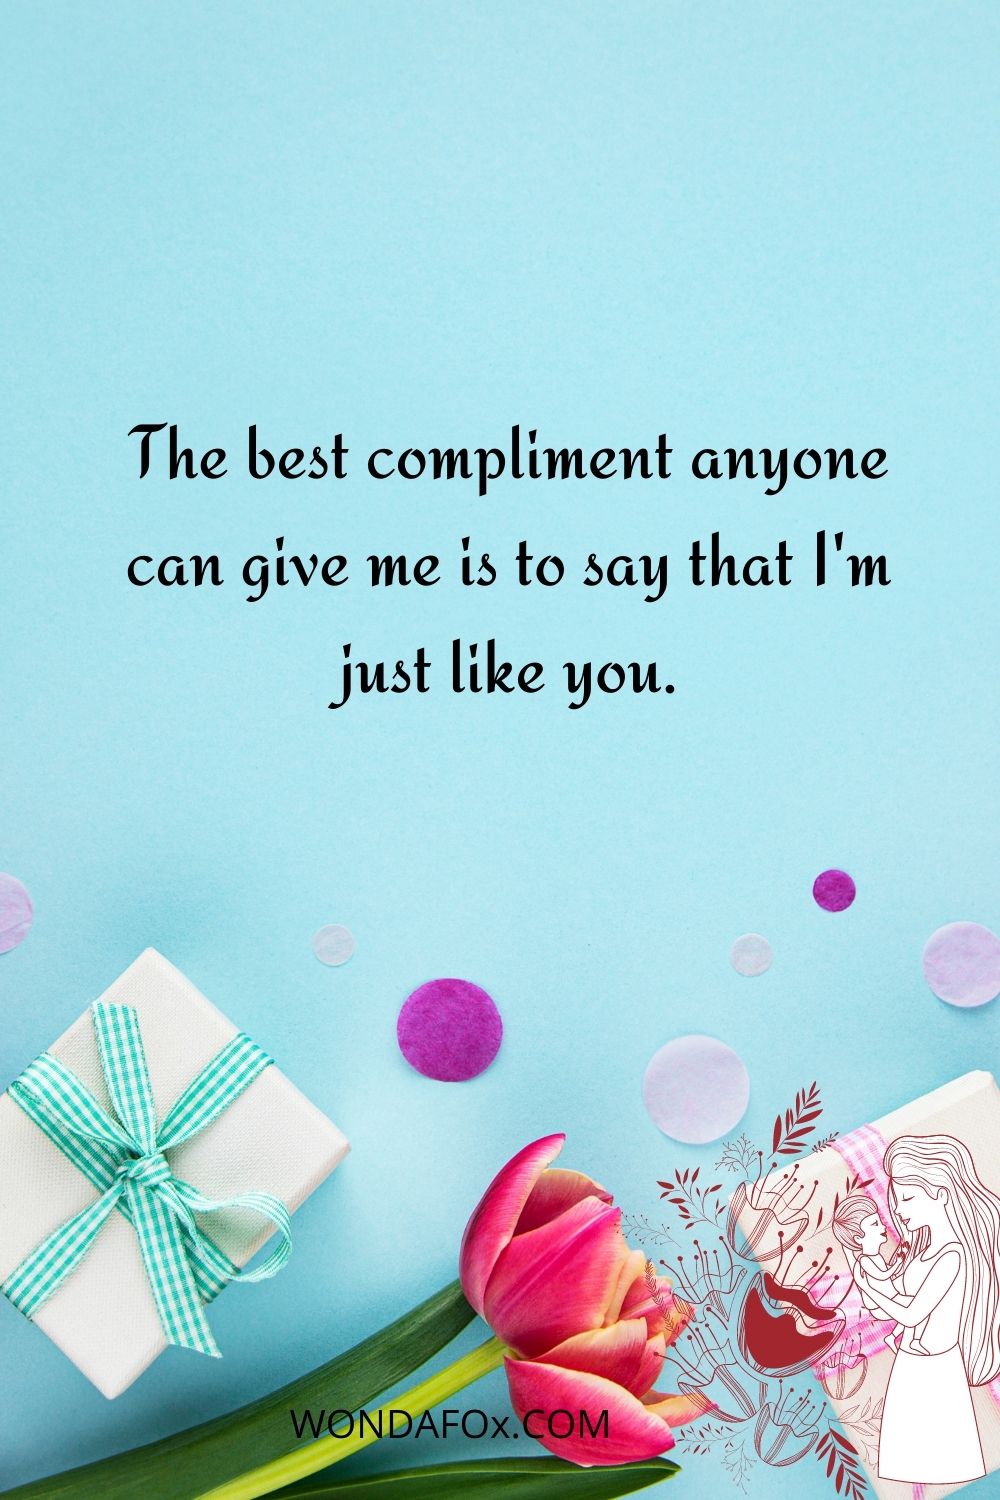 The best compliment anyone can give me is to say that I'm just like you.